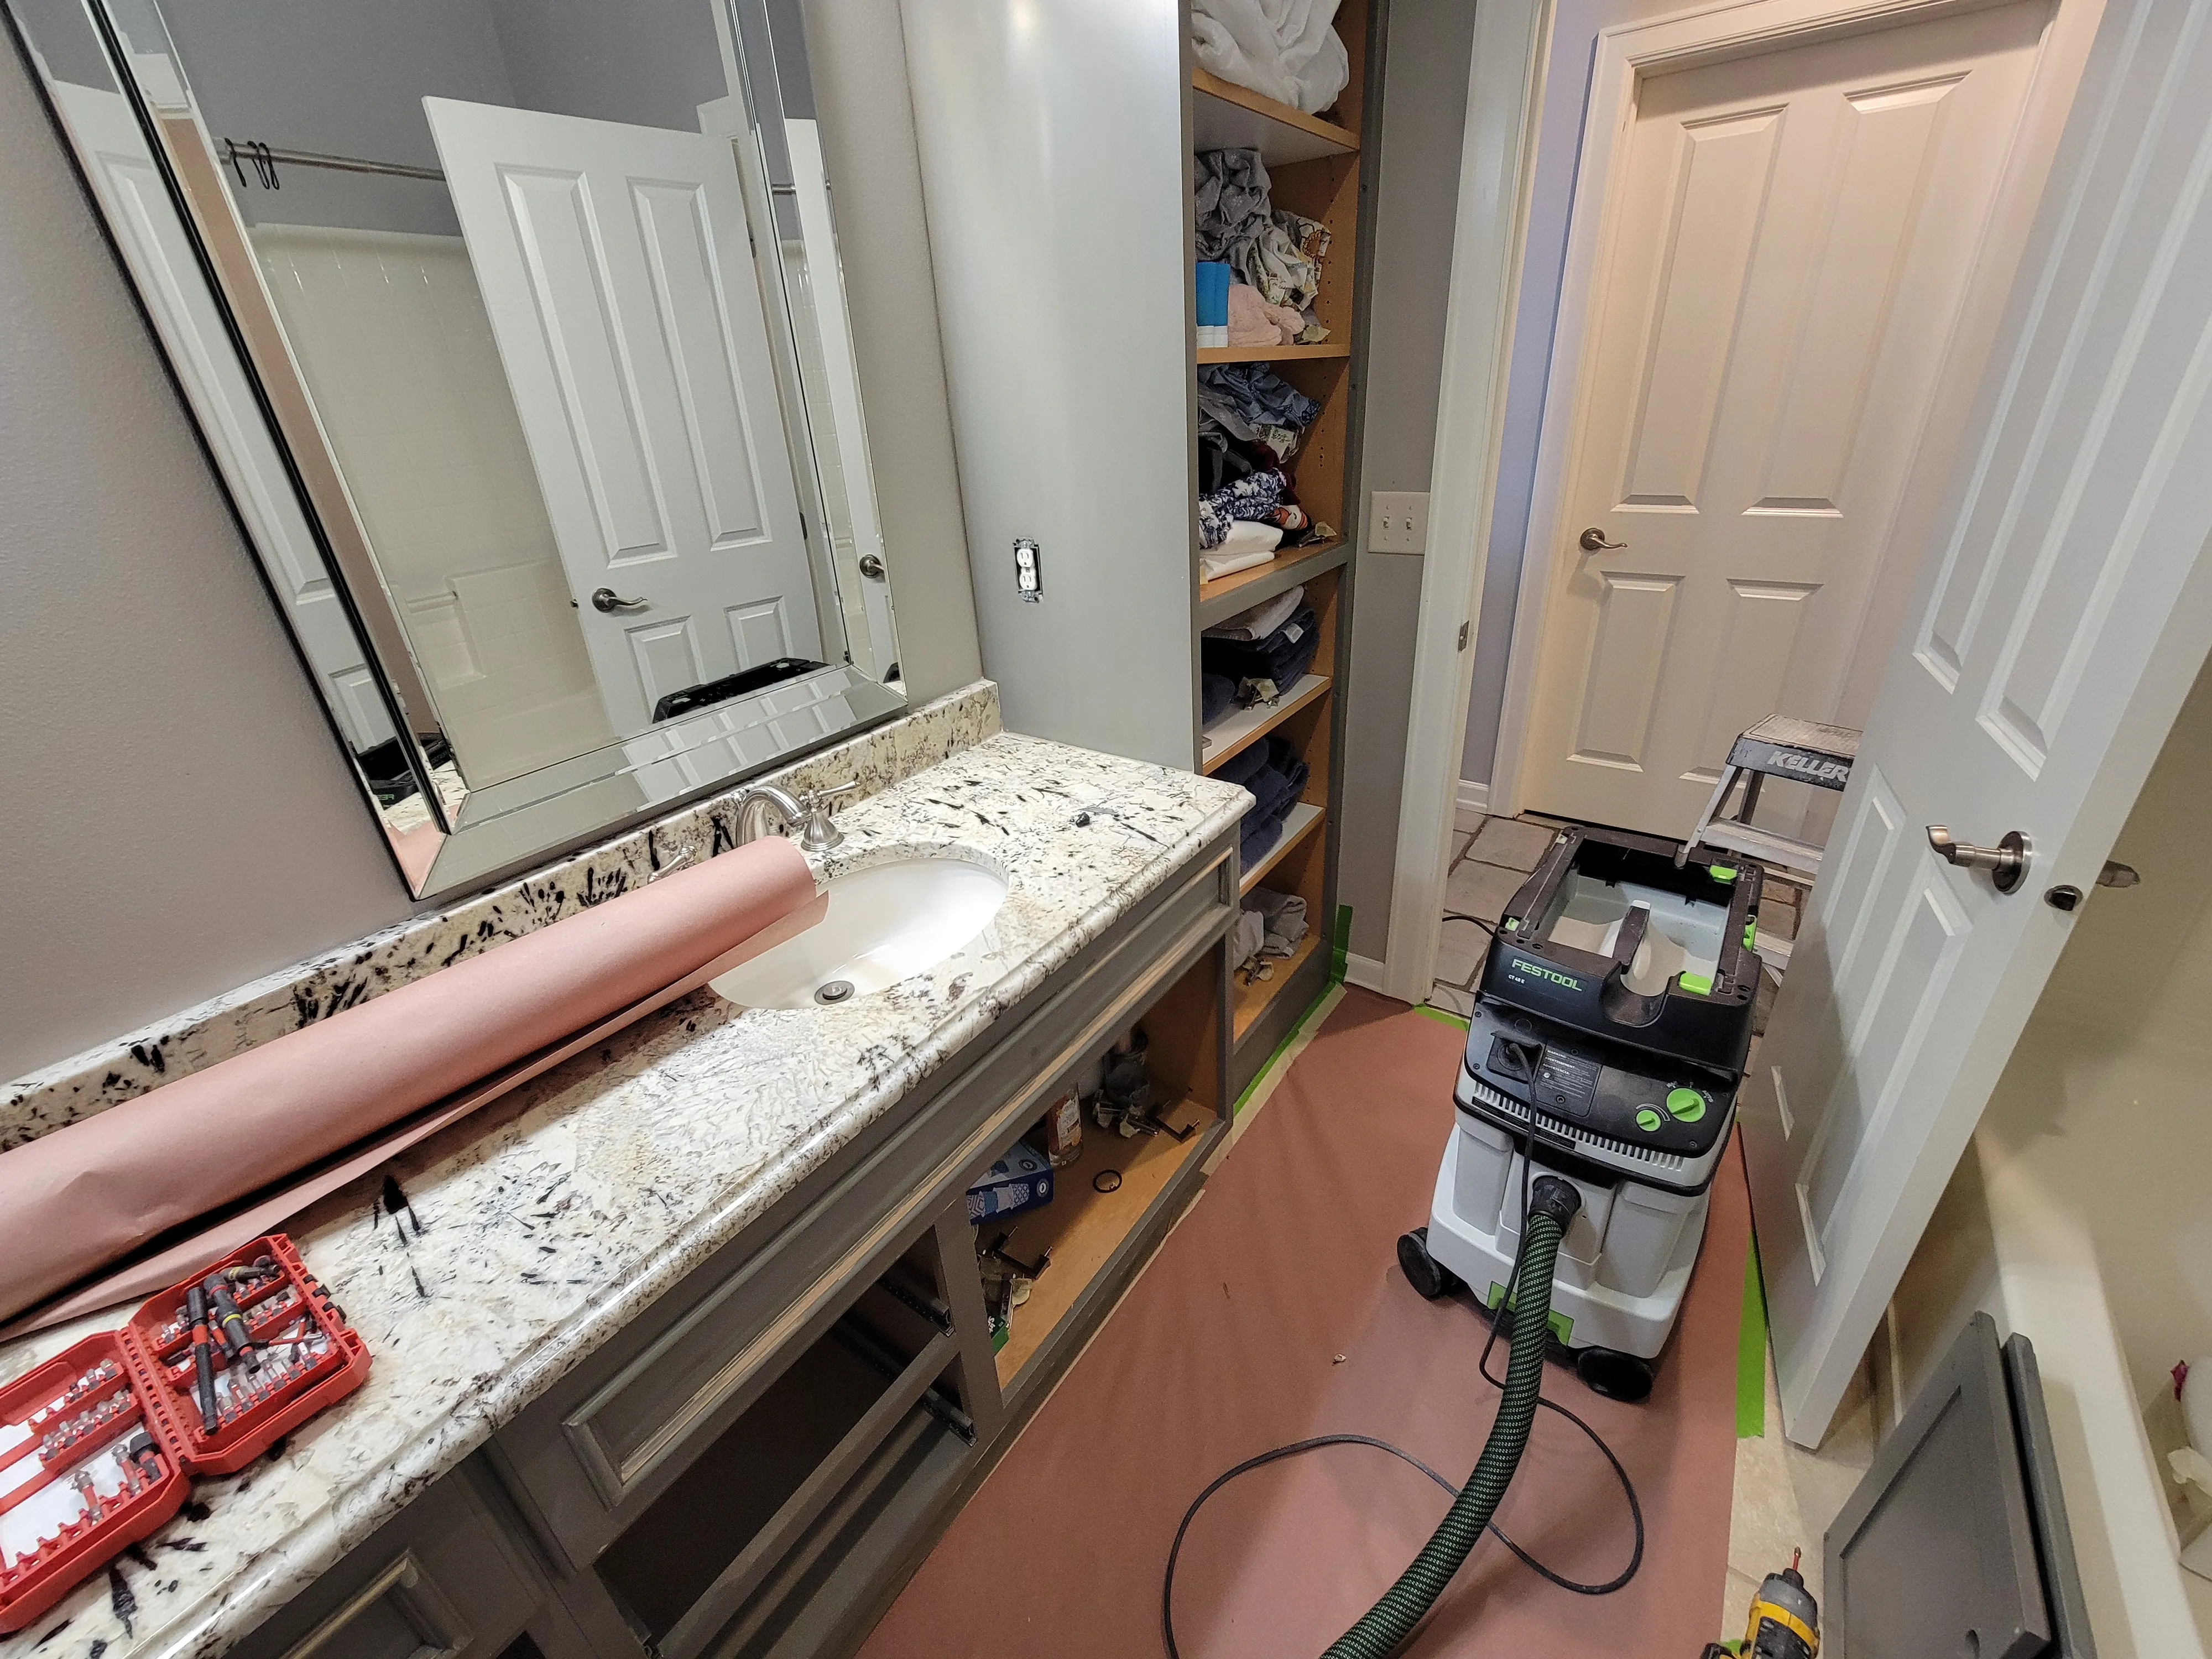 Kitchen and Cabinet Refinishing for Brush Brothers Painting in Sioux Falls, SD